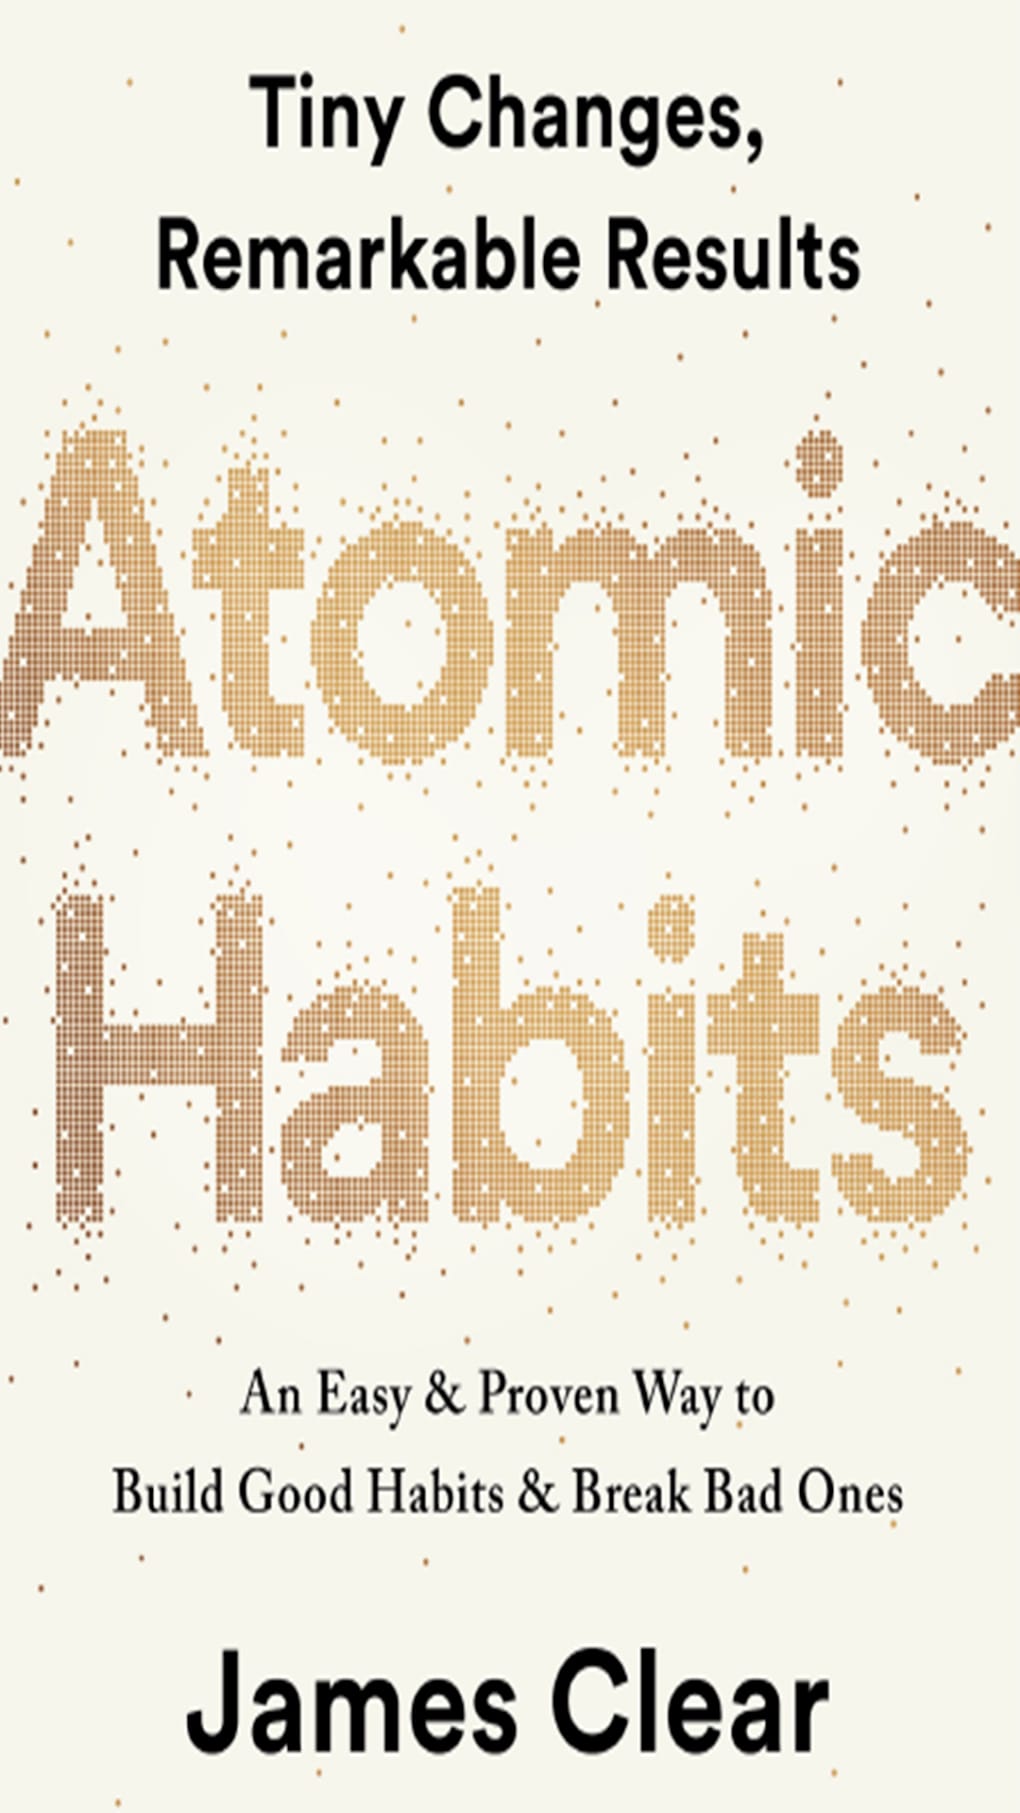 atomic habits by james clear review